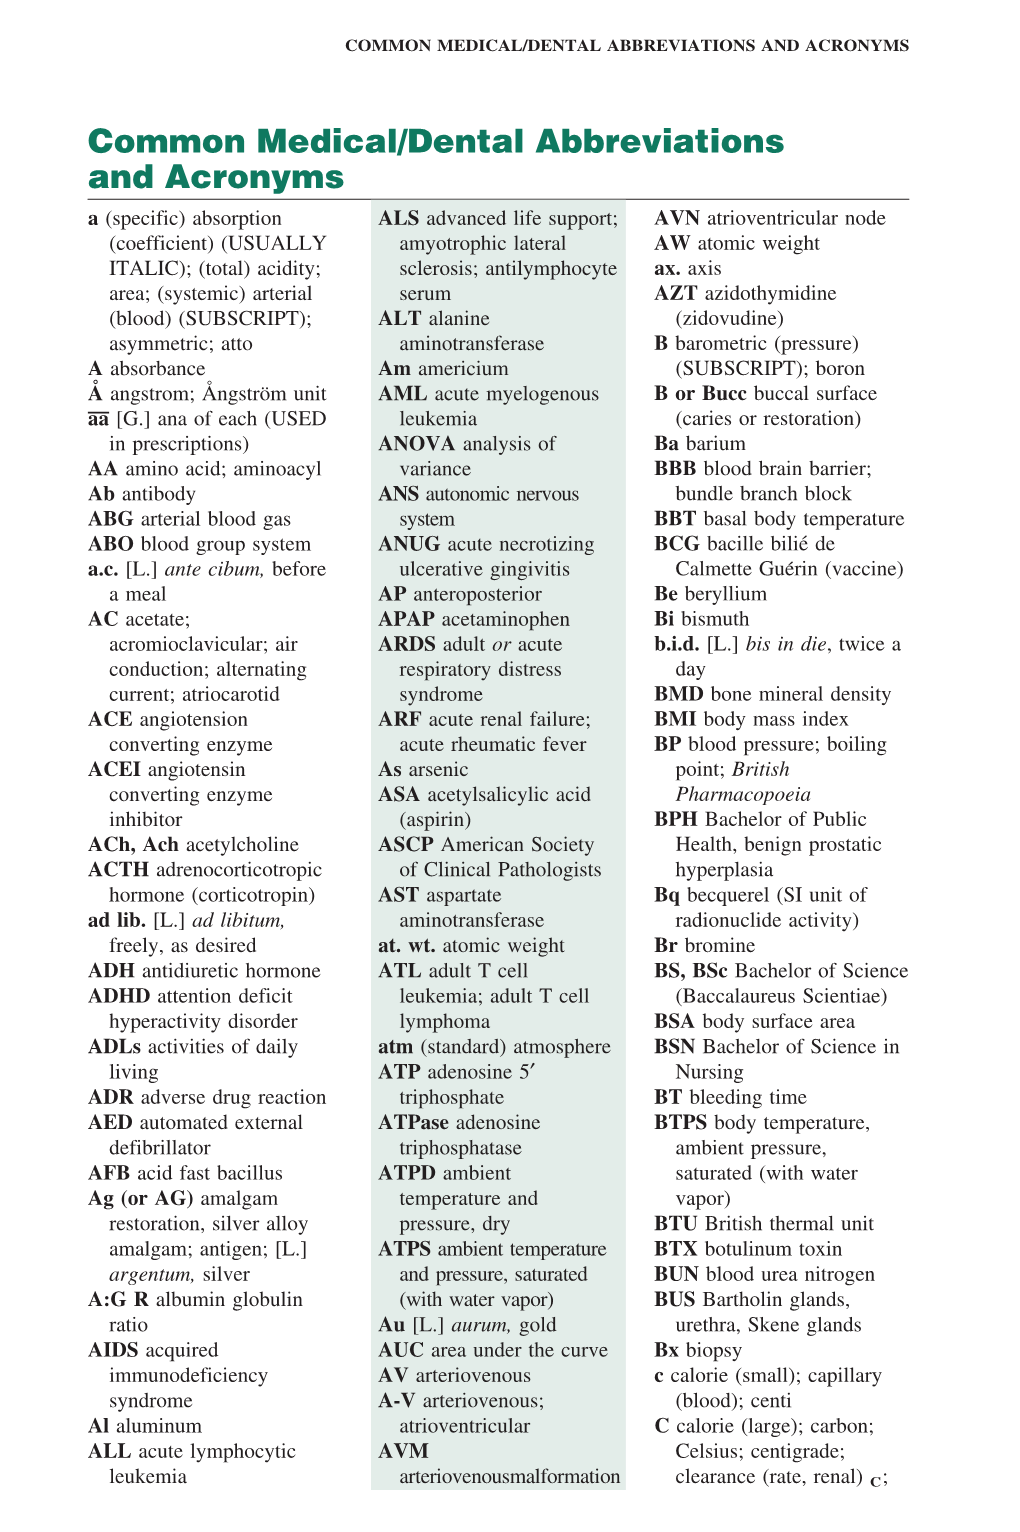 Common Medical/Dental Abbreviations and Acronyms